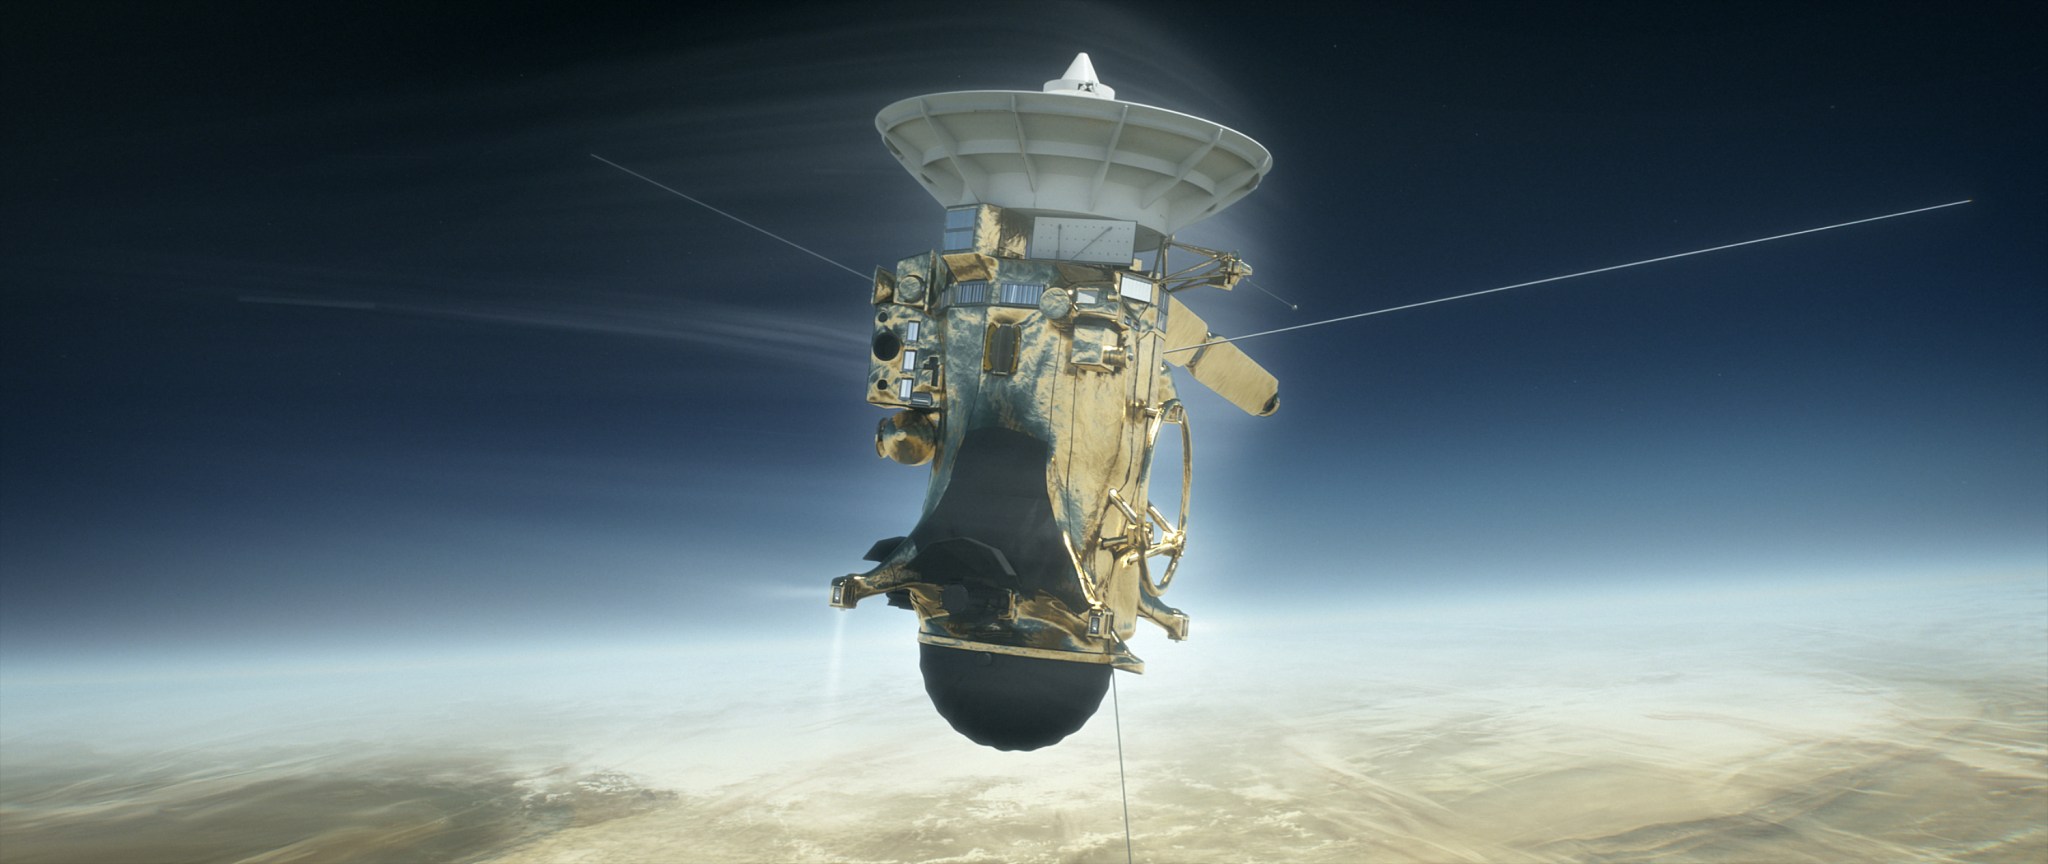 NASA's Cassini spacecraft is shown during its Sept. 15, 2017, plunge into Saturn's atmosphere in this artist's depiction. 